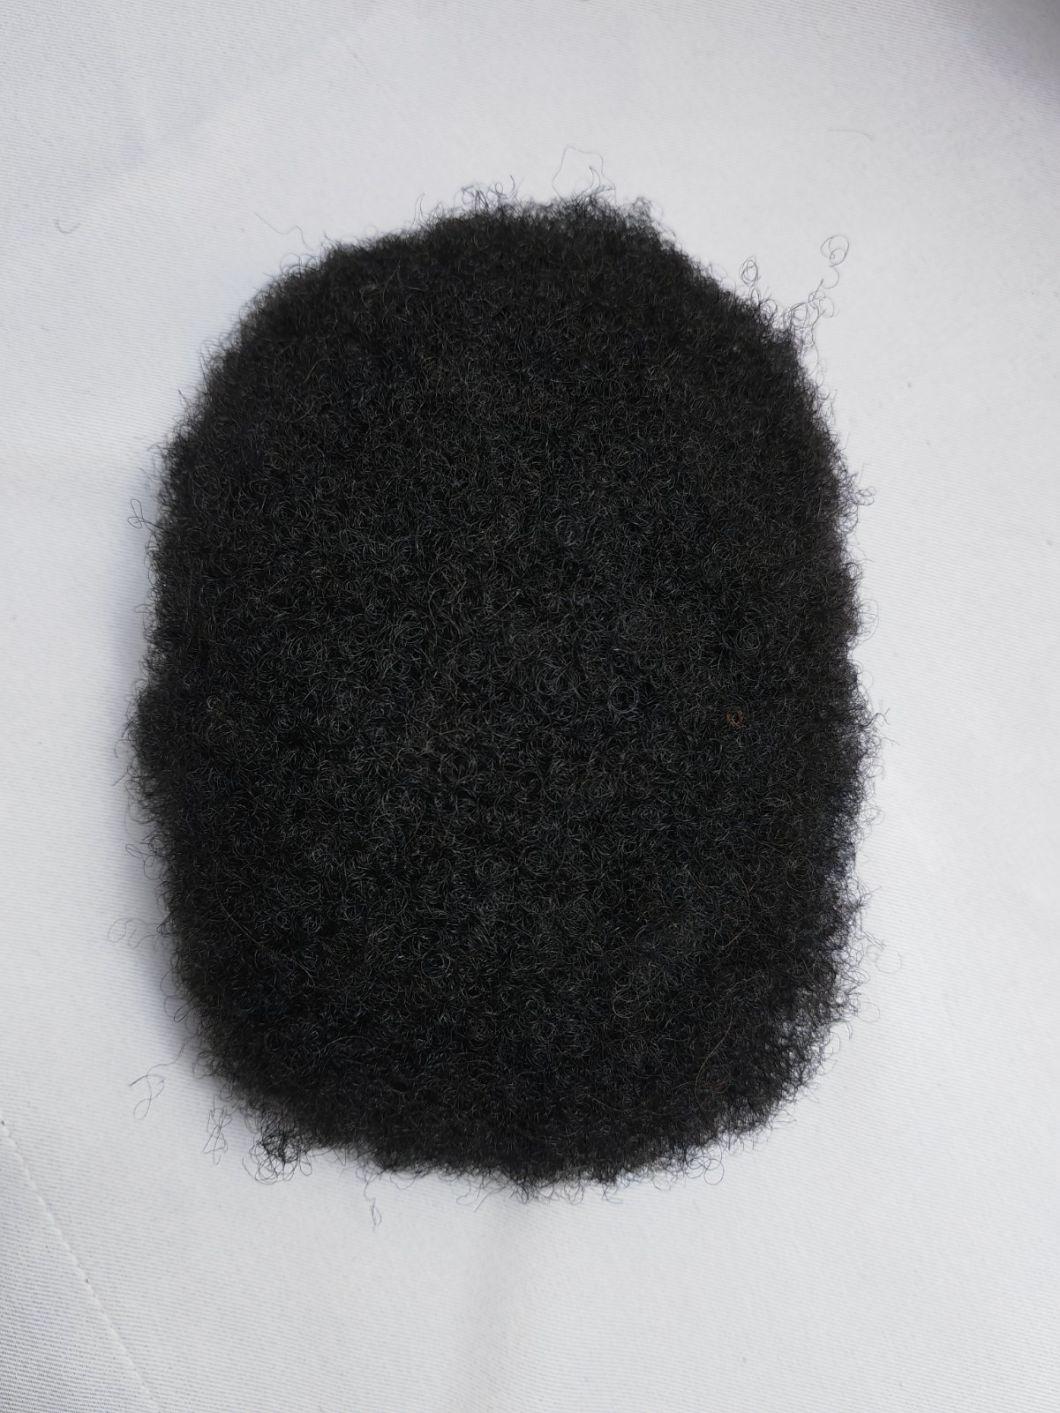 2022 Best Custom Made Comfortable Fine Mono Base Human Hair Wig Made of Remy Human Hair